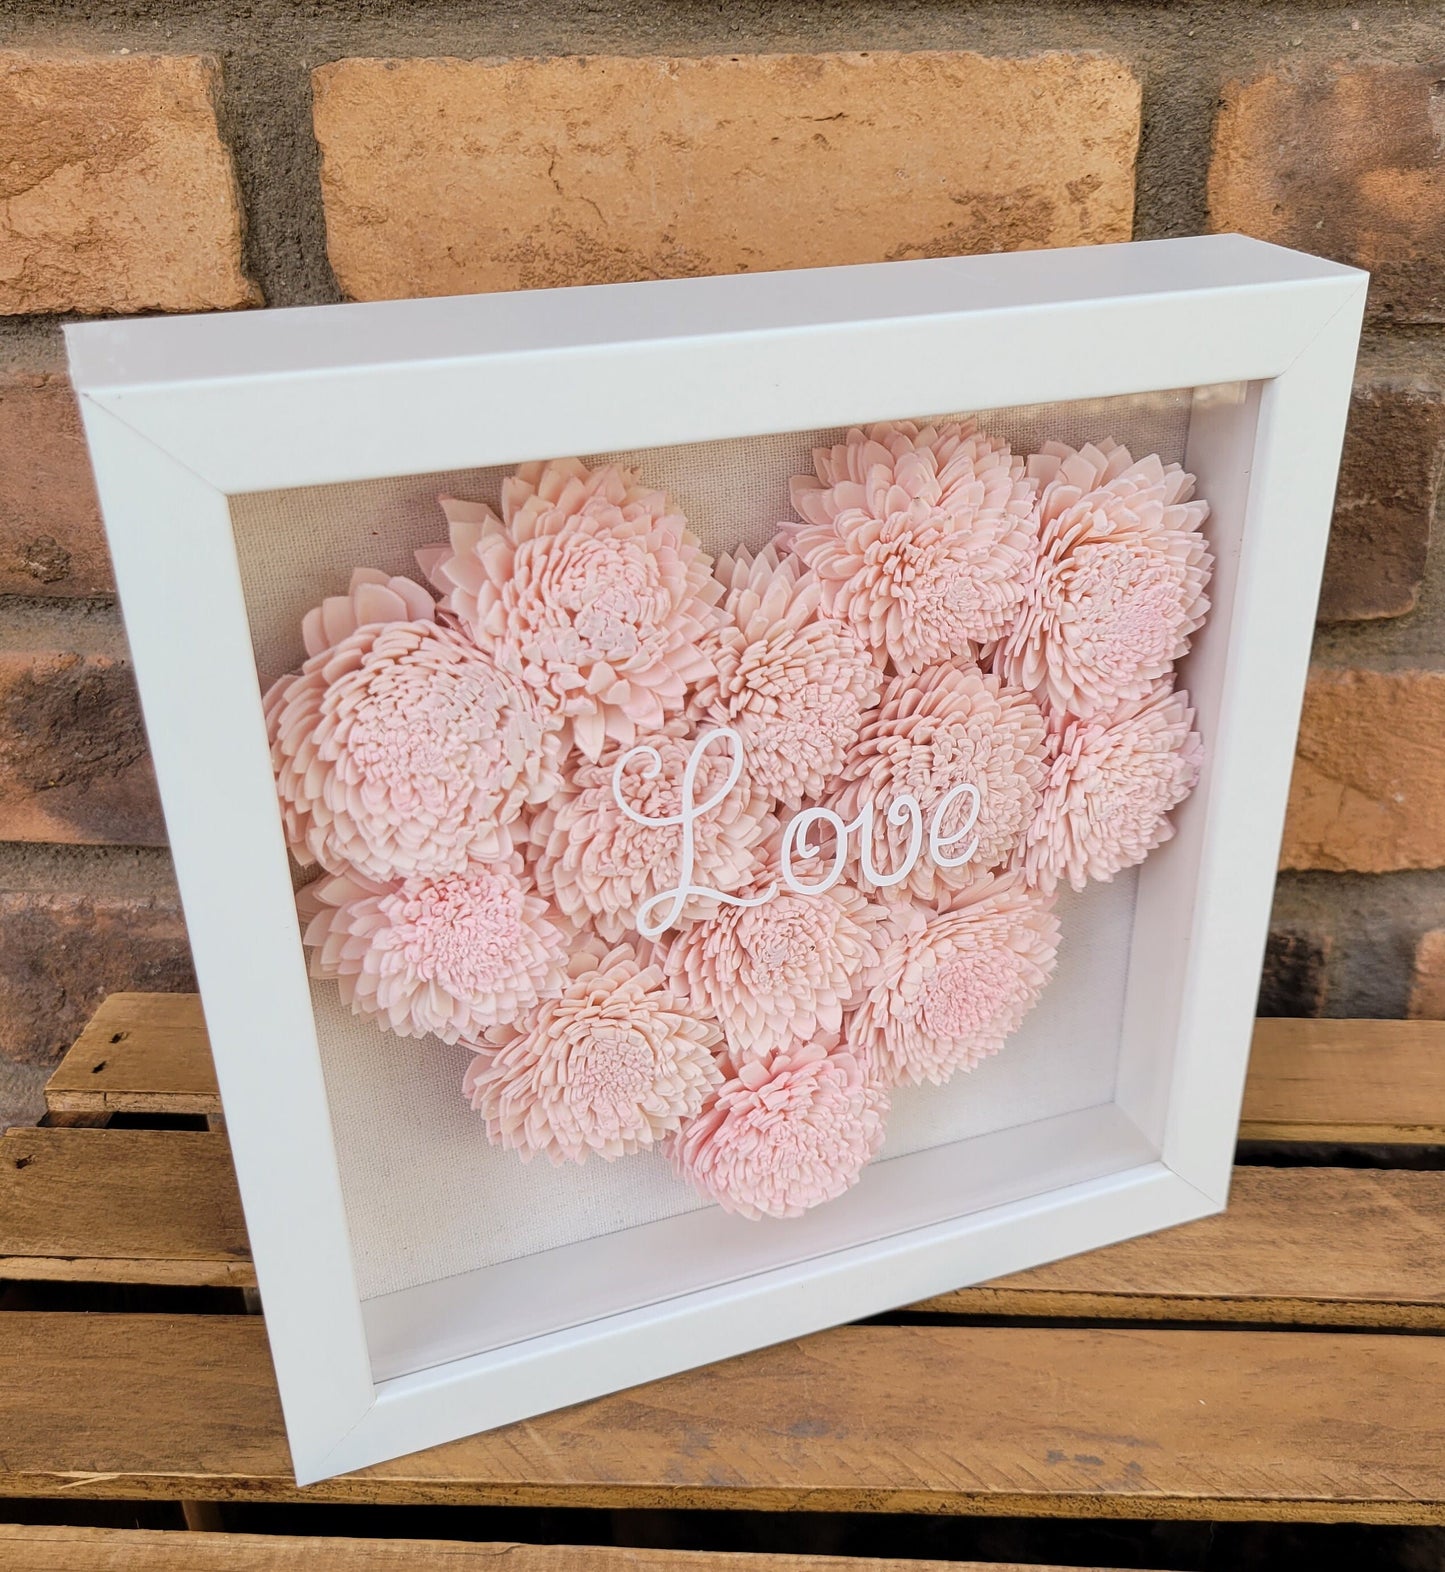 Shadow Box with Wood Flower Heart, Dried Flowers in Shadow Box, Pressed Flowers, Valentine's Gift, Mother's Day Gift